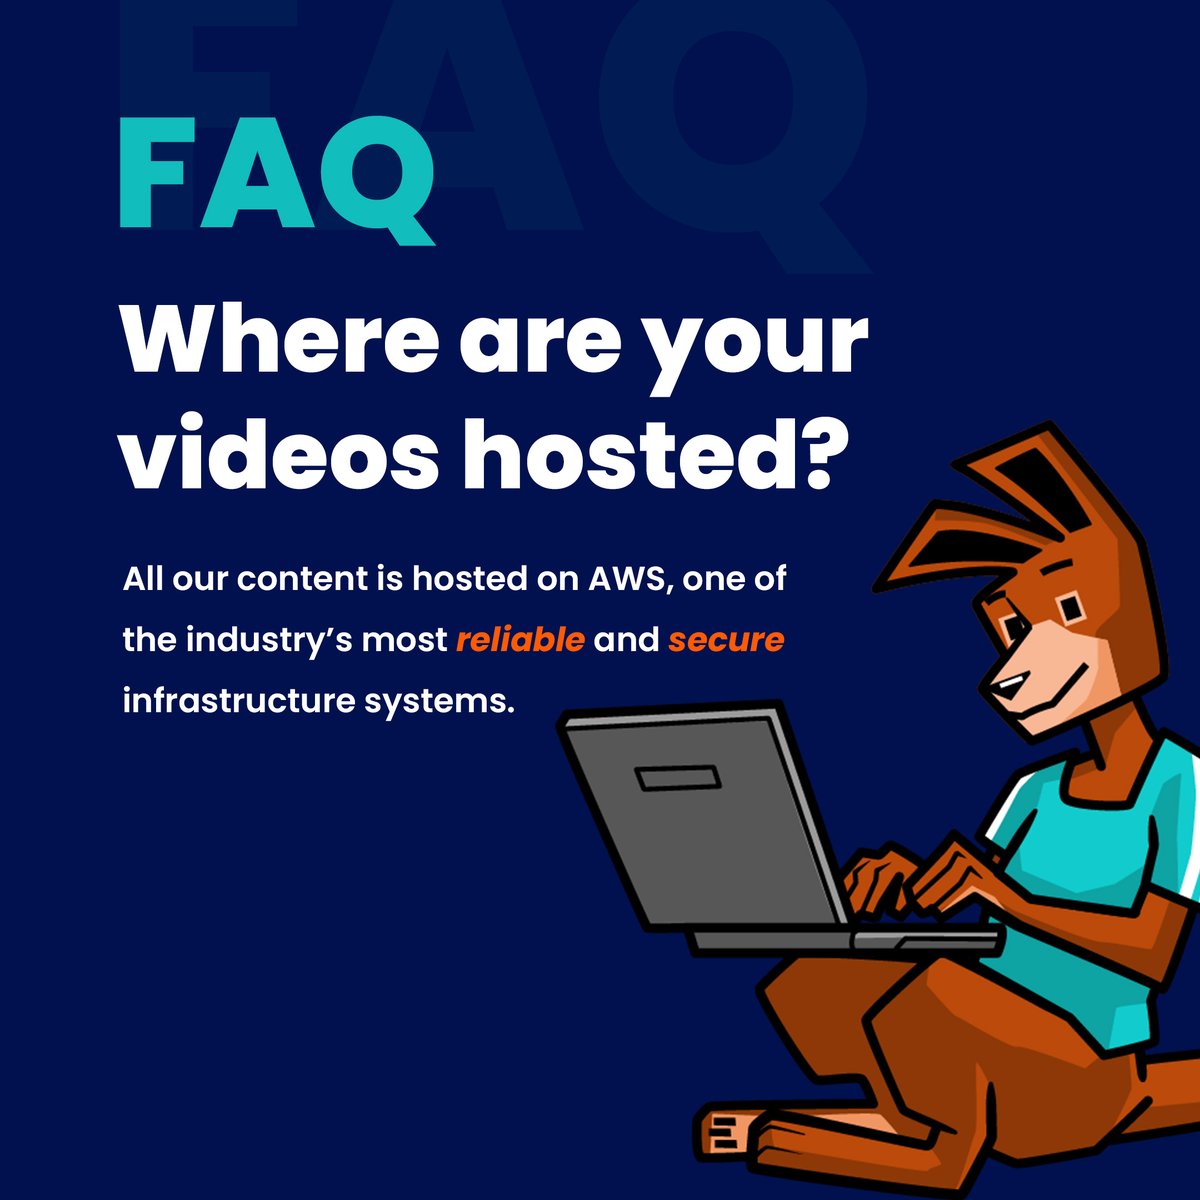 🌐✨ Hosting made secure with AWS! 💻🔒 Our content is backed by one of the industry's most reliable and secure infrastructure systems. Rest assured, your experience with us is top-notch! 😊 
#HeyKanga #AWS #ReliableHosting #SecureInfrastructure #Technology #EdTech